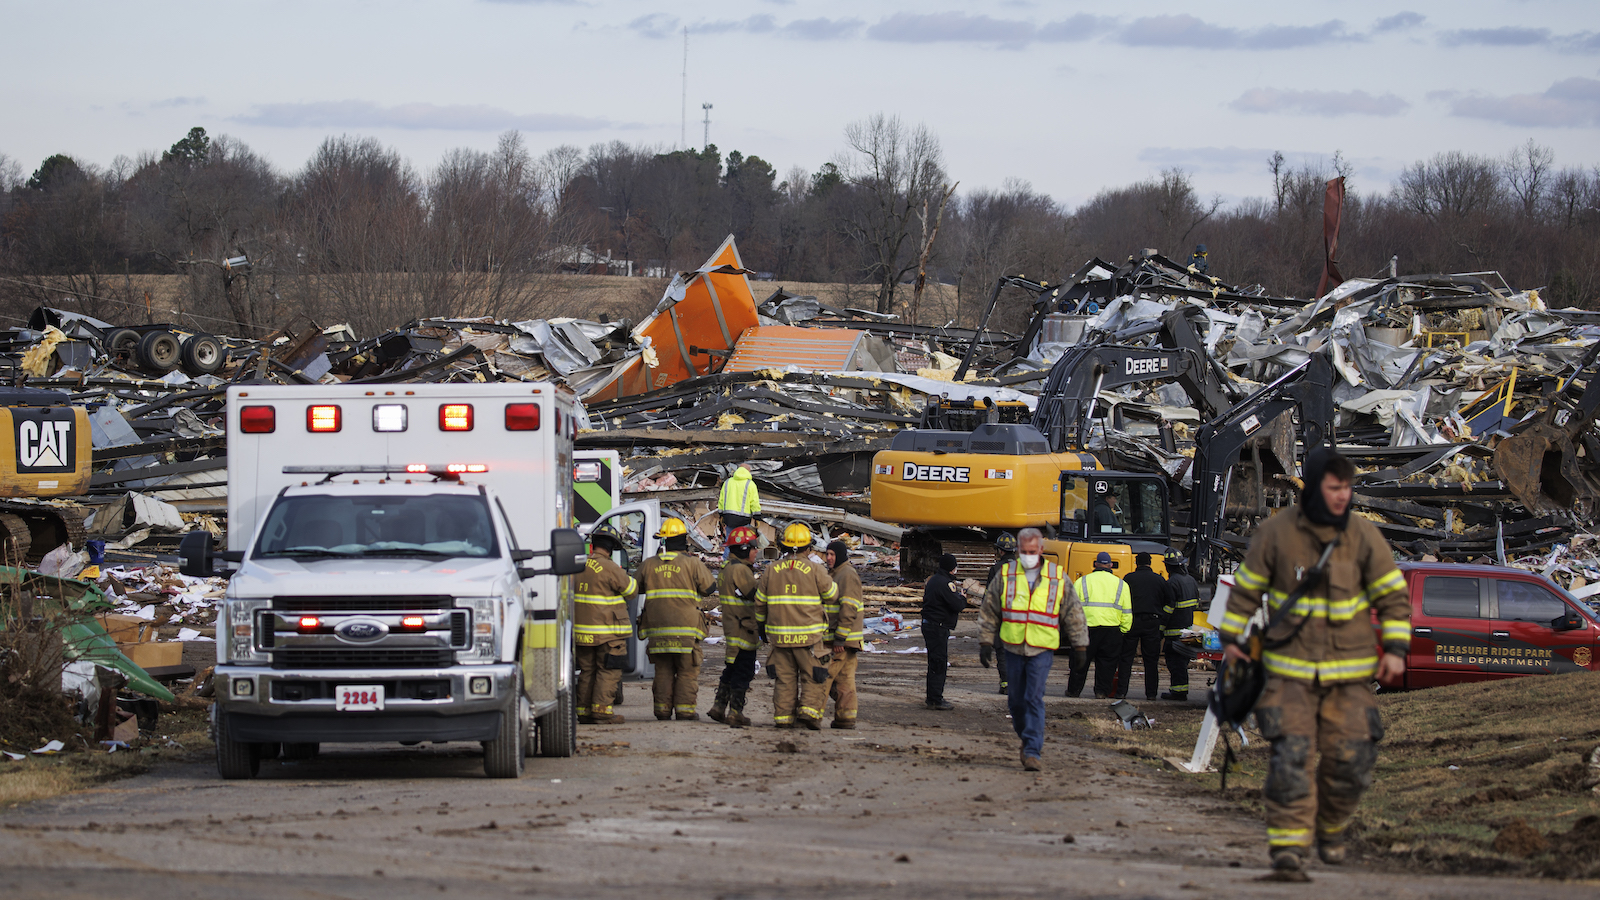 Emergency crews search through the flattened Mayfield Consumer Products building on December 11, 2021 in Mayfield, Kentucky.